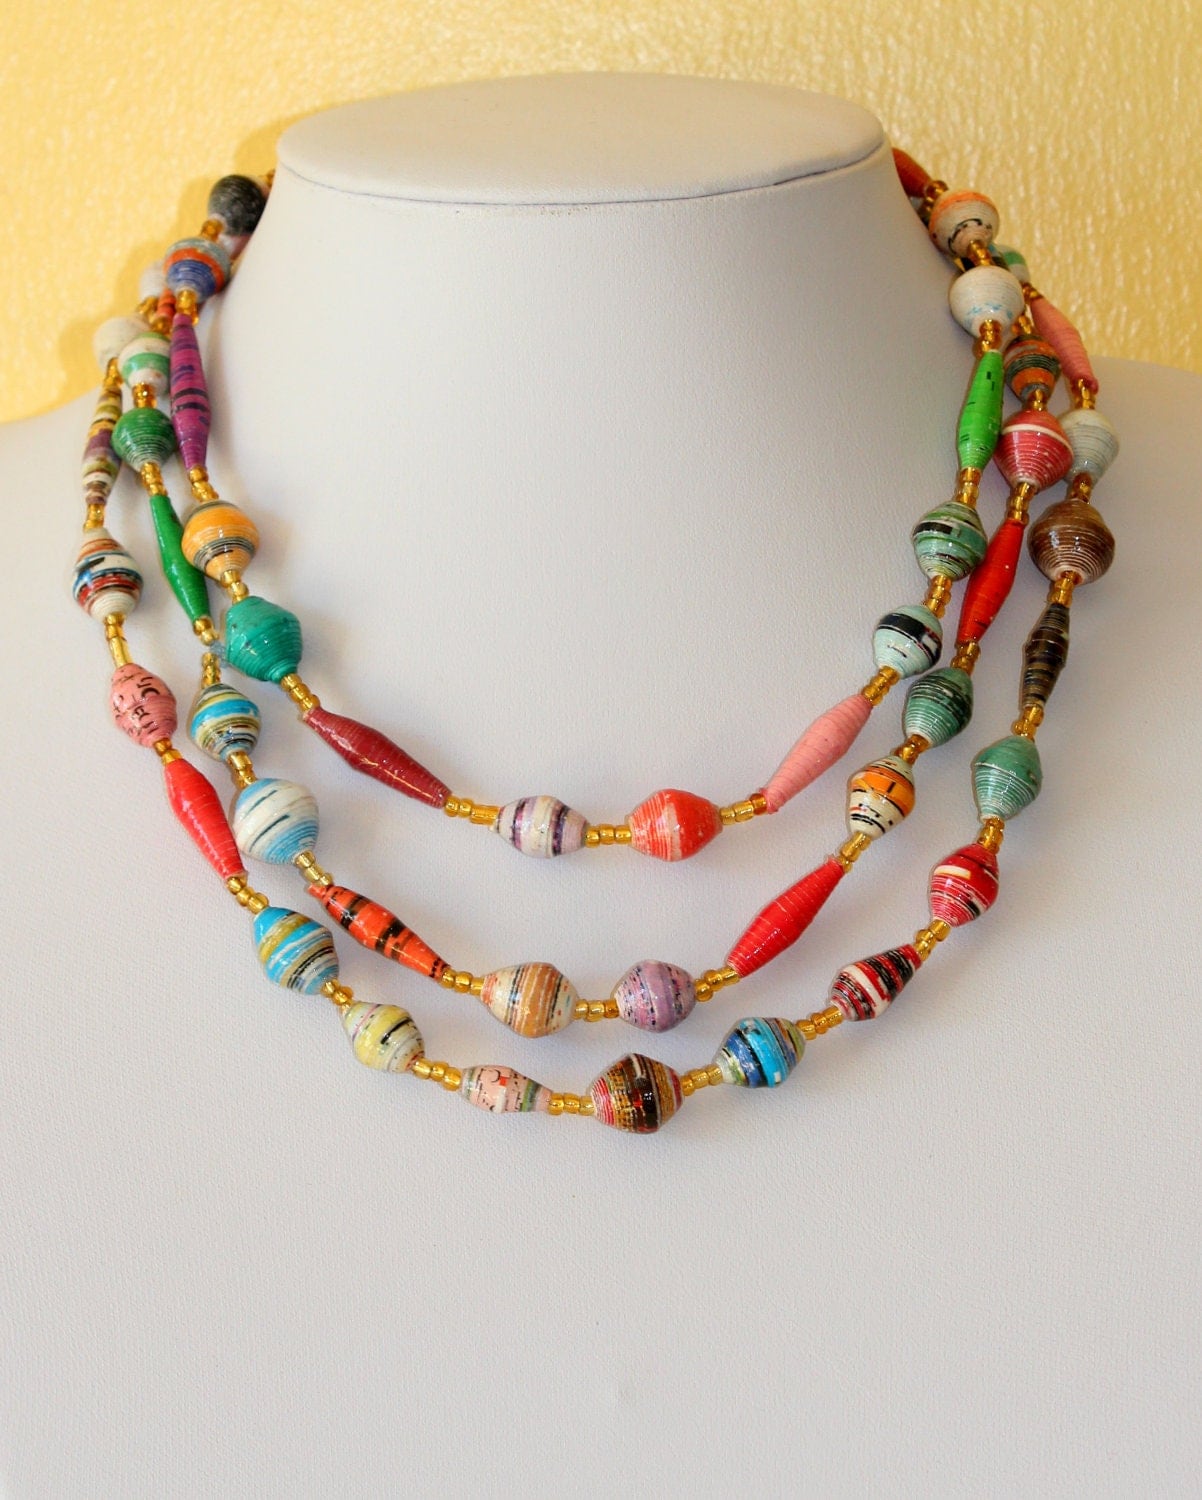 African Design Necklace. Hand Rolled Paper Beads. Paper Mache.